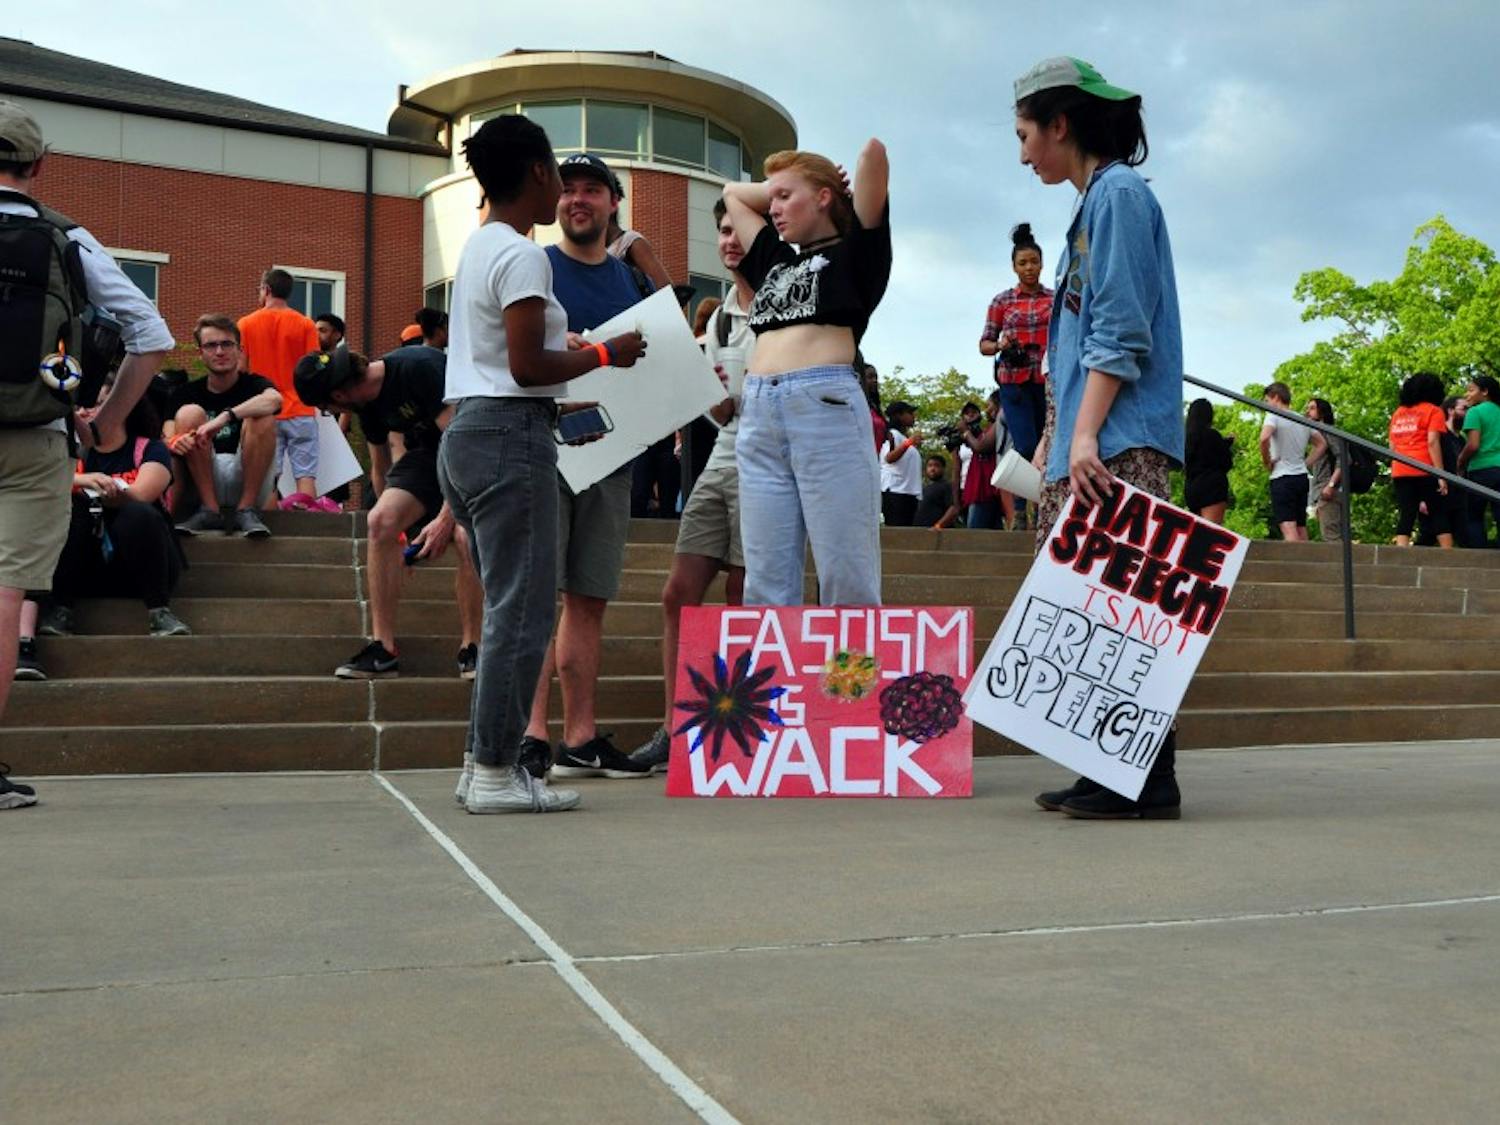 Students prepare to march down to the Green Space to protest Richard Spencer's visit on campus on Tuesday, April 18, 2017, in Auburn, Ala.